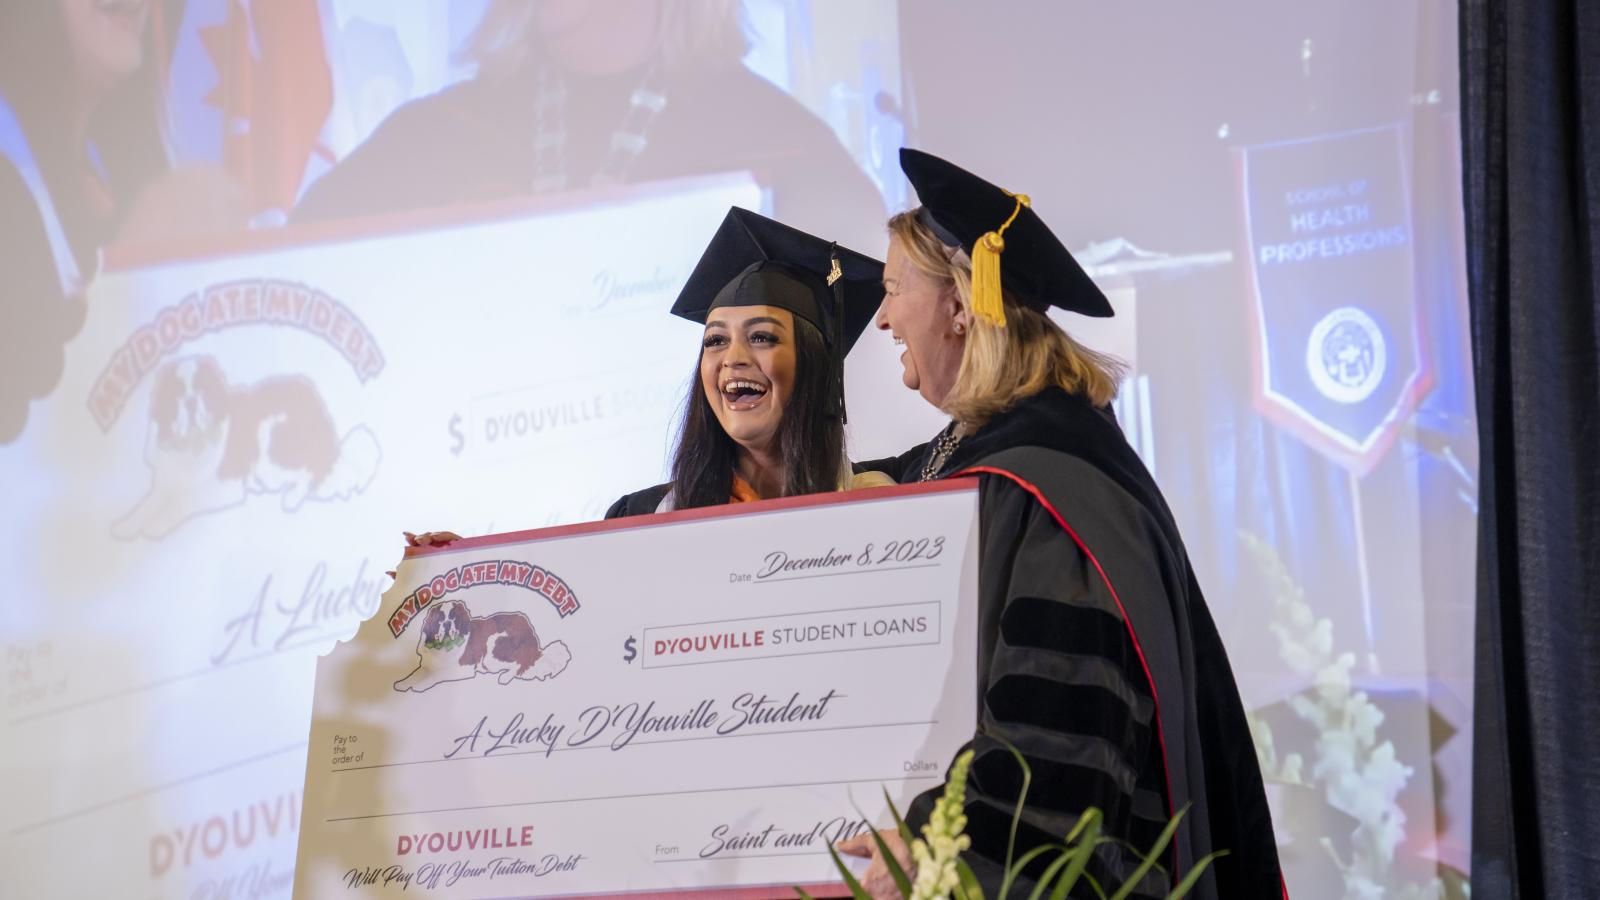 President Dr. Lorrie Clemo, in graduation regalia, stands with student in graduation cap and gown. They hold a giant check representing a payment of the lottery winner's student loan debt.